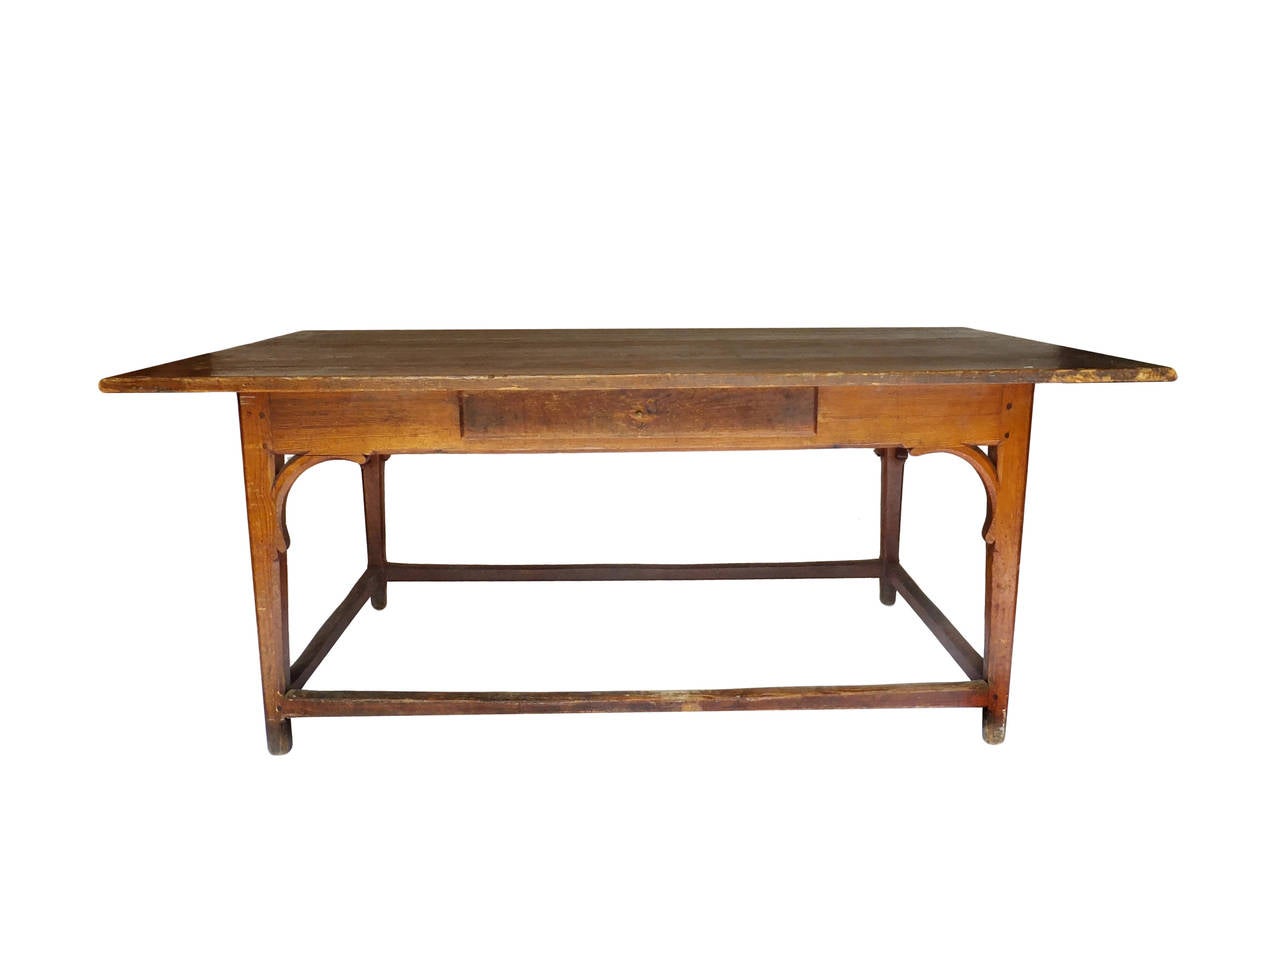 Belgian table with stretchers and single drawer. Comfortable for dining but chairs cannot be pushed all the way in.